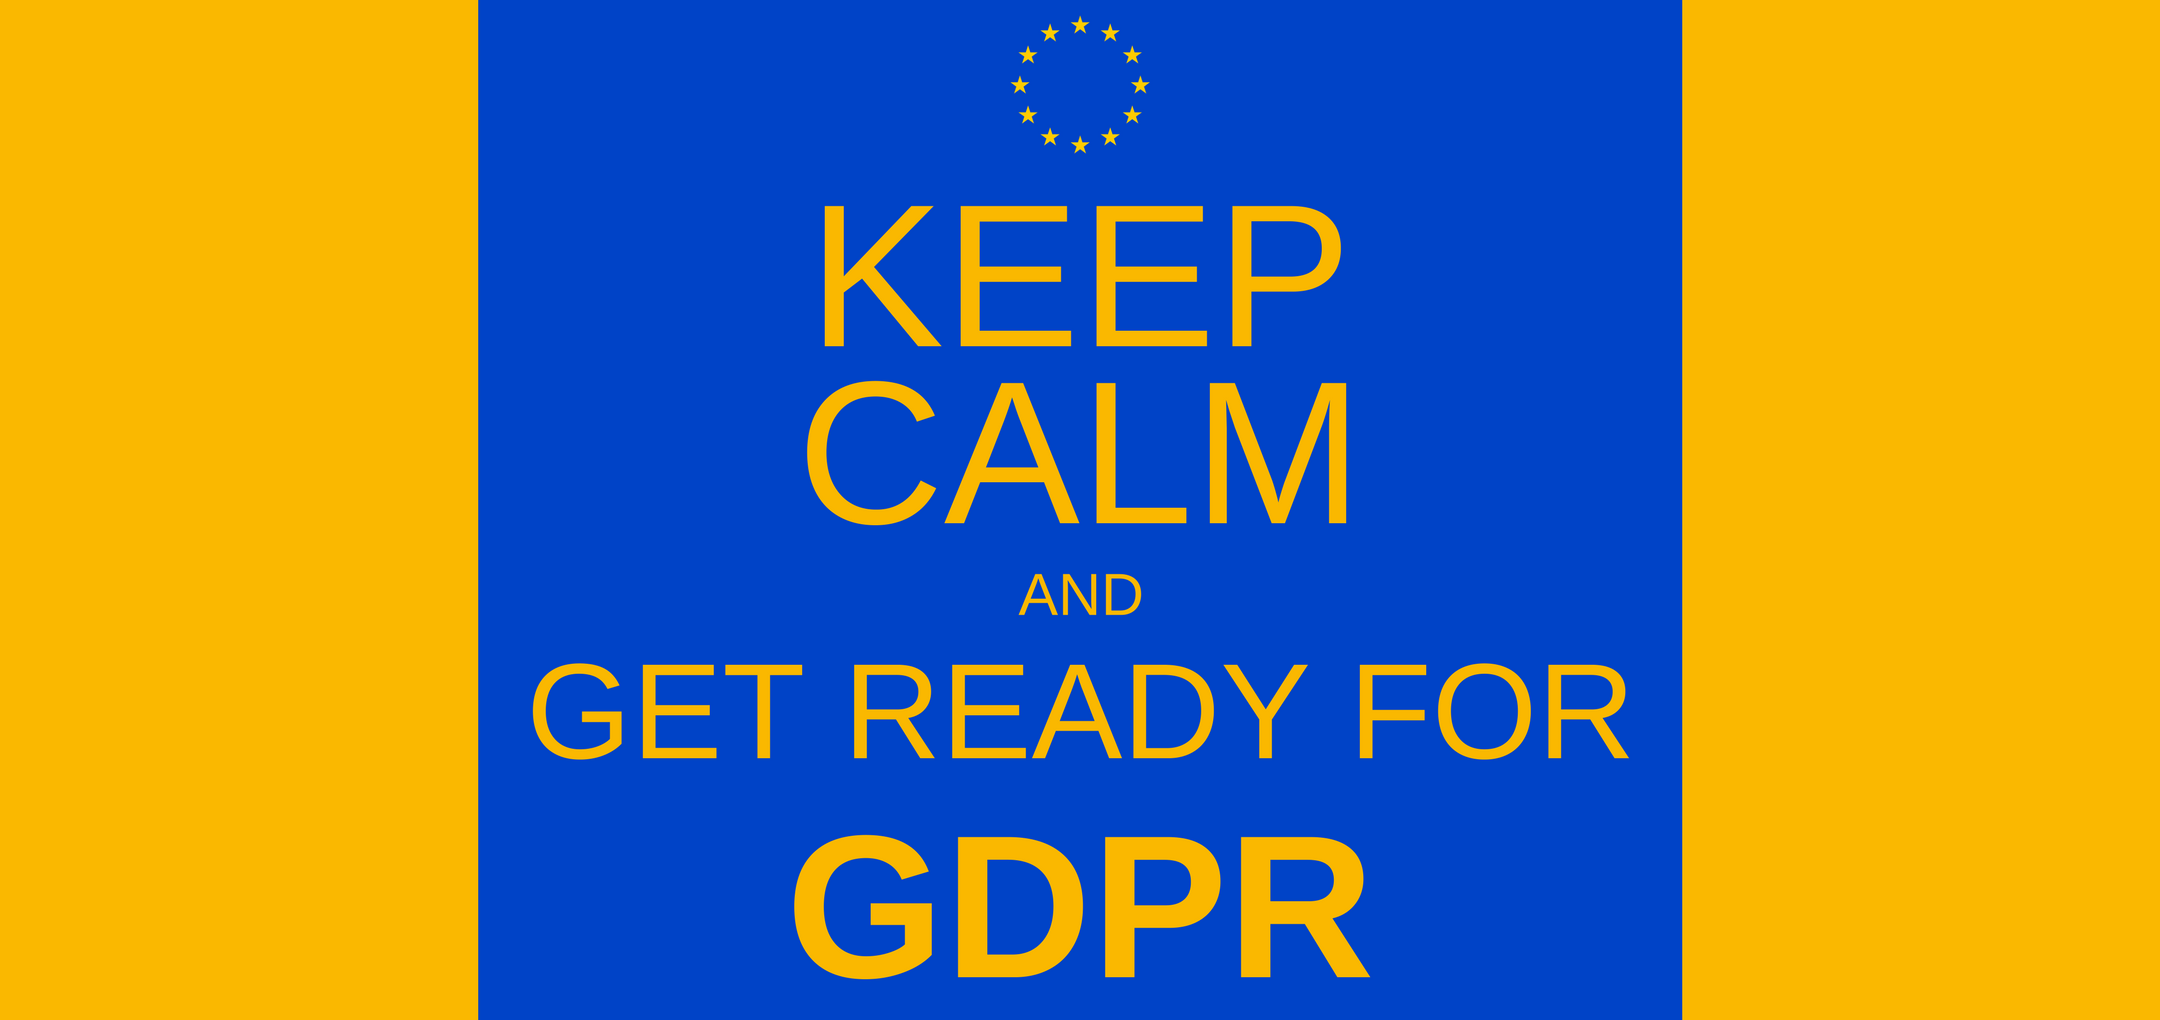 Keep Calm and get ready for GDPR